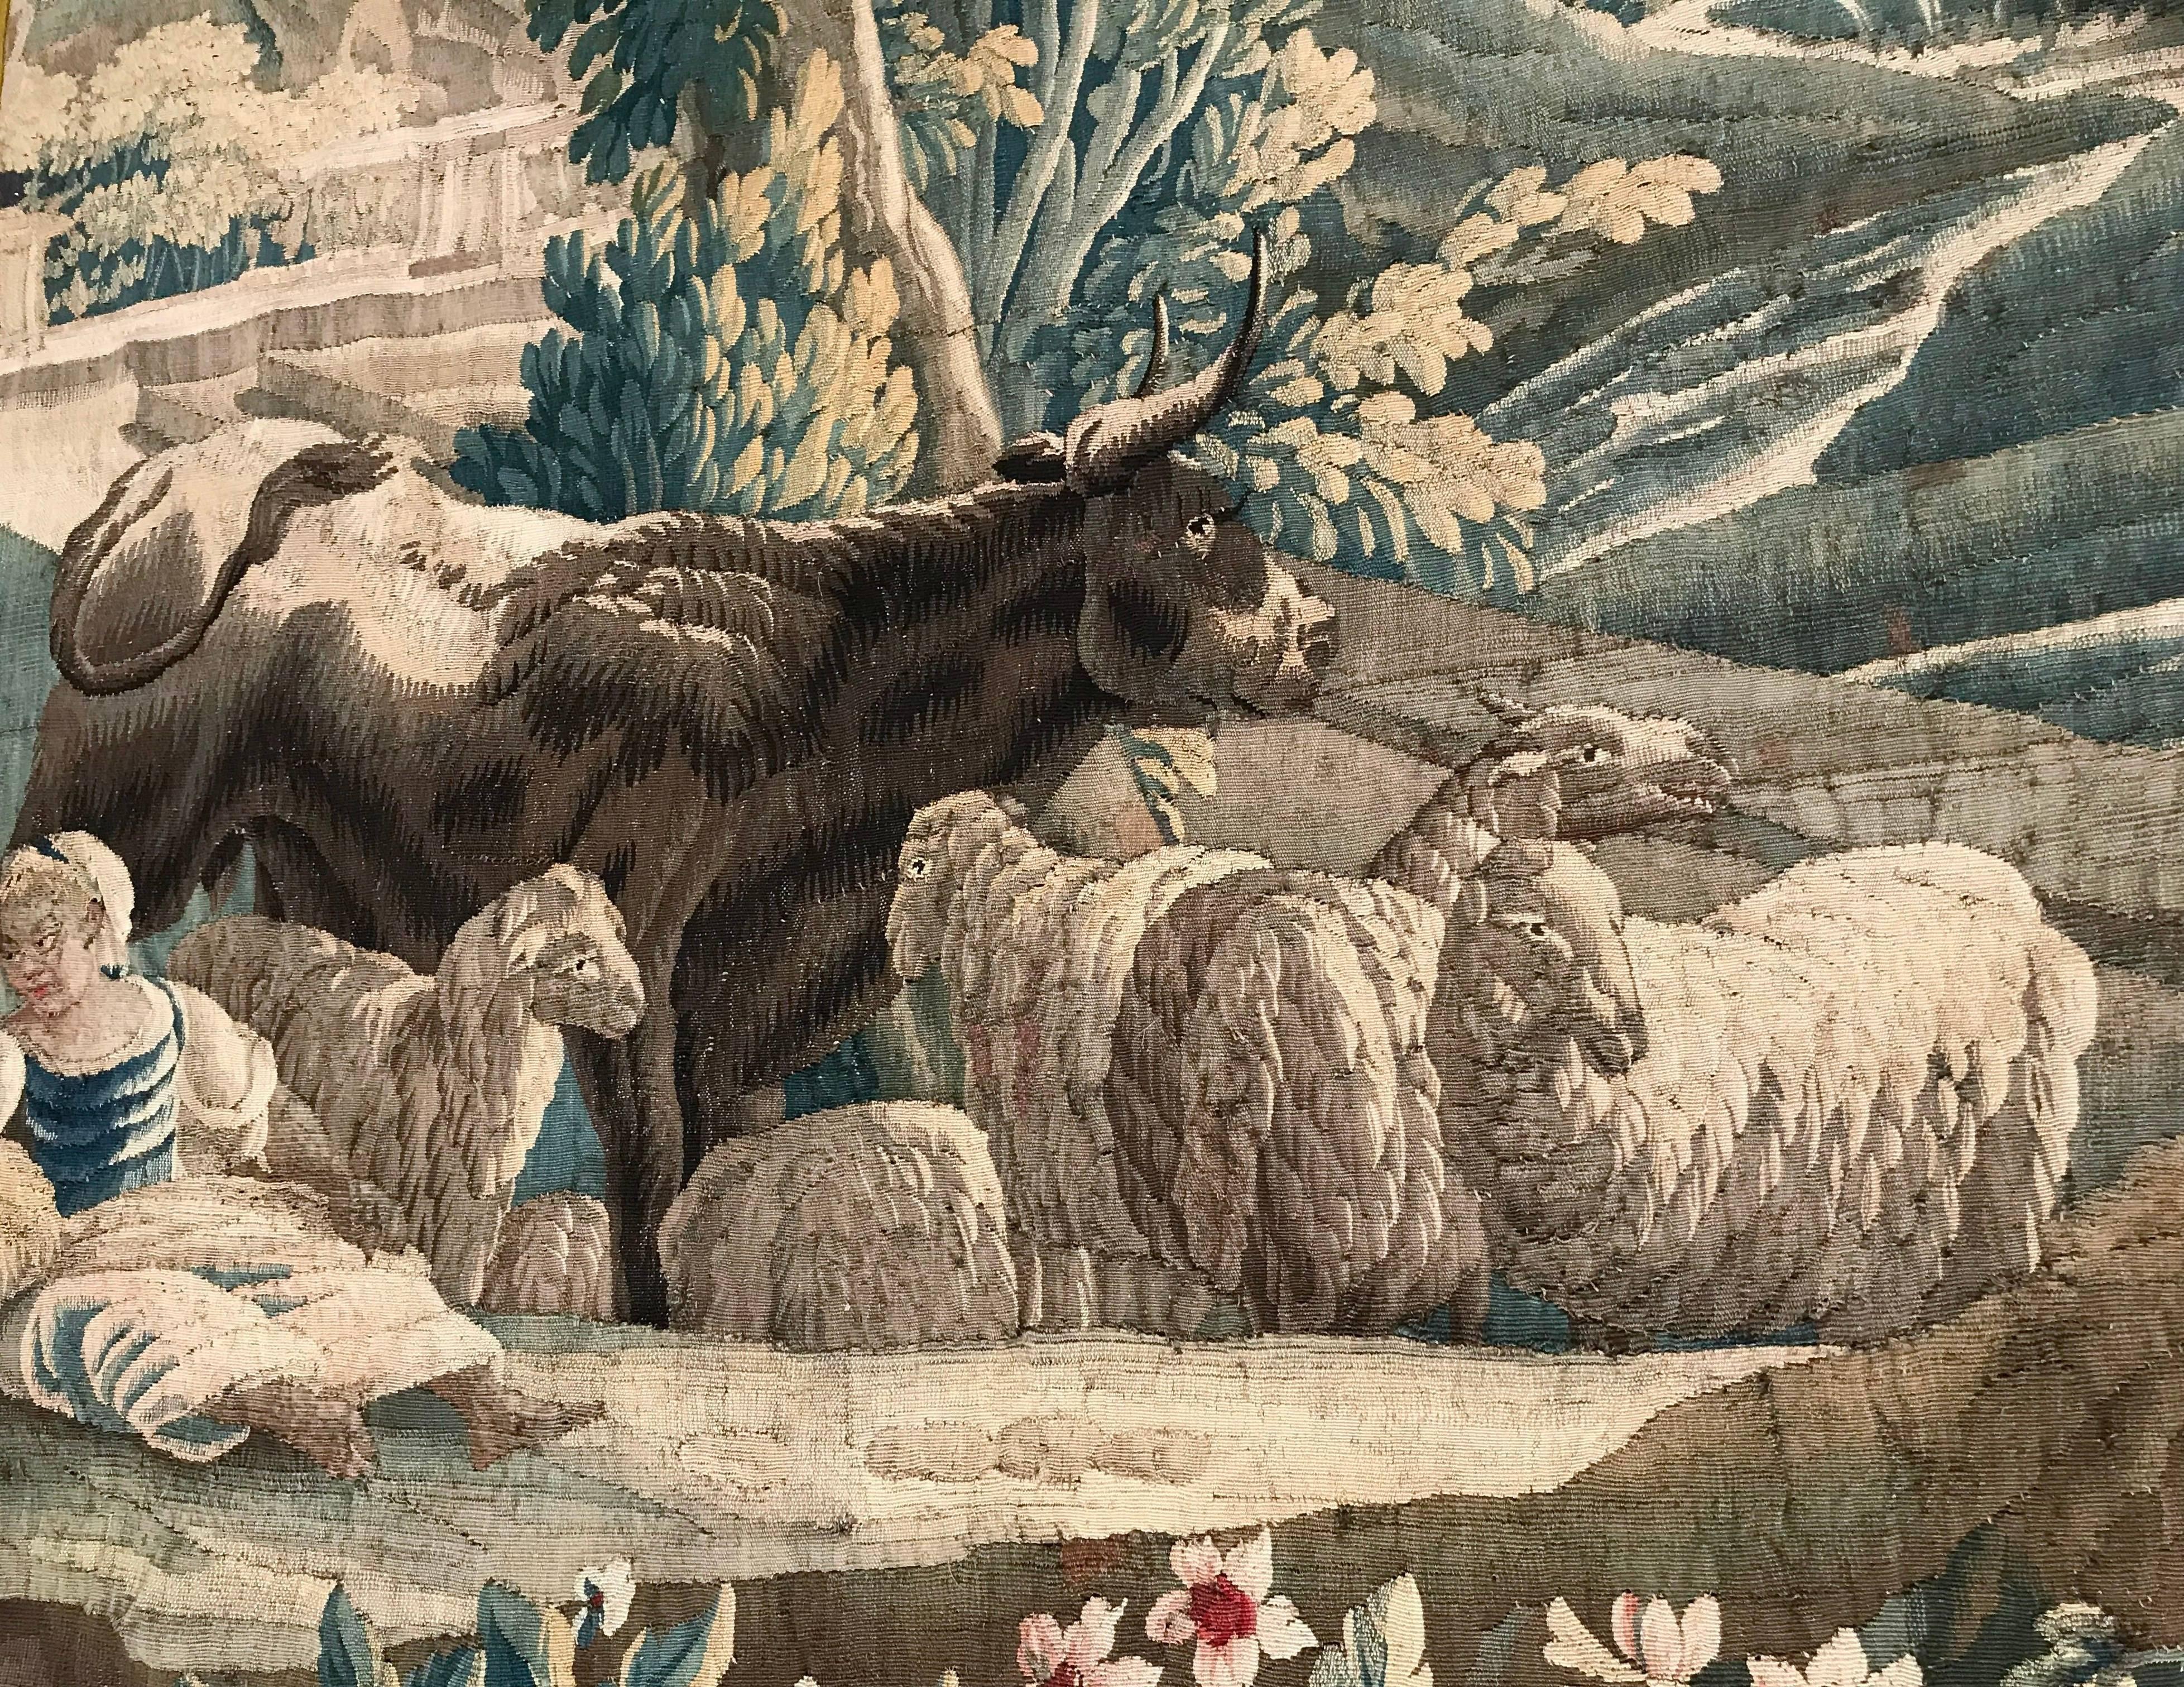 Hand-Woven 18th Century French Aubusson Tapestry with Cow Sheep Shepherd and Roman Palace